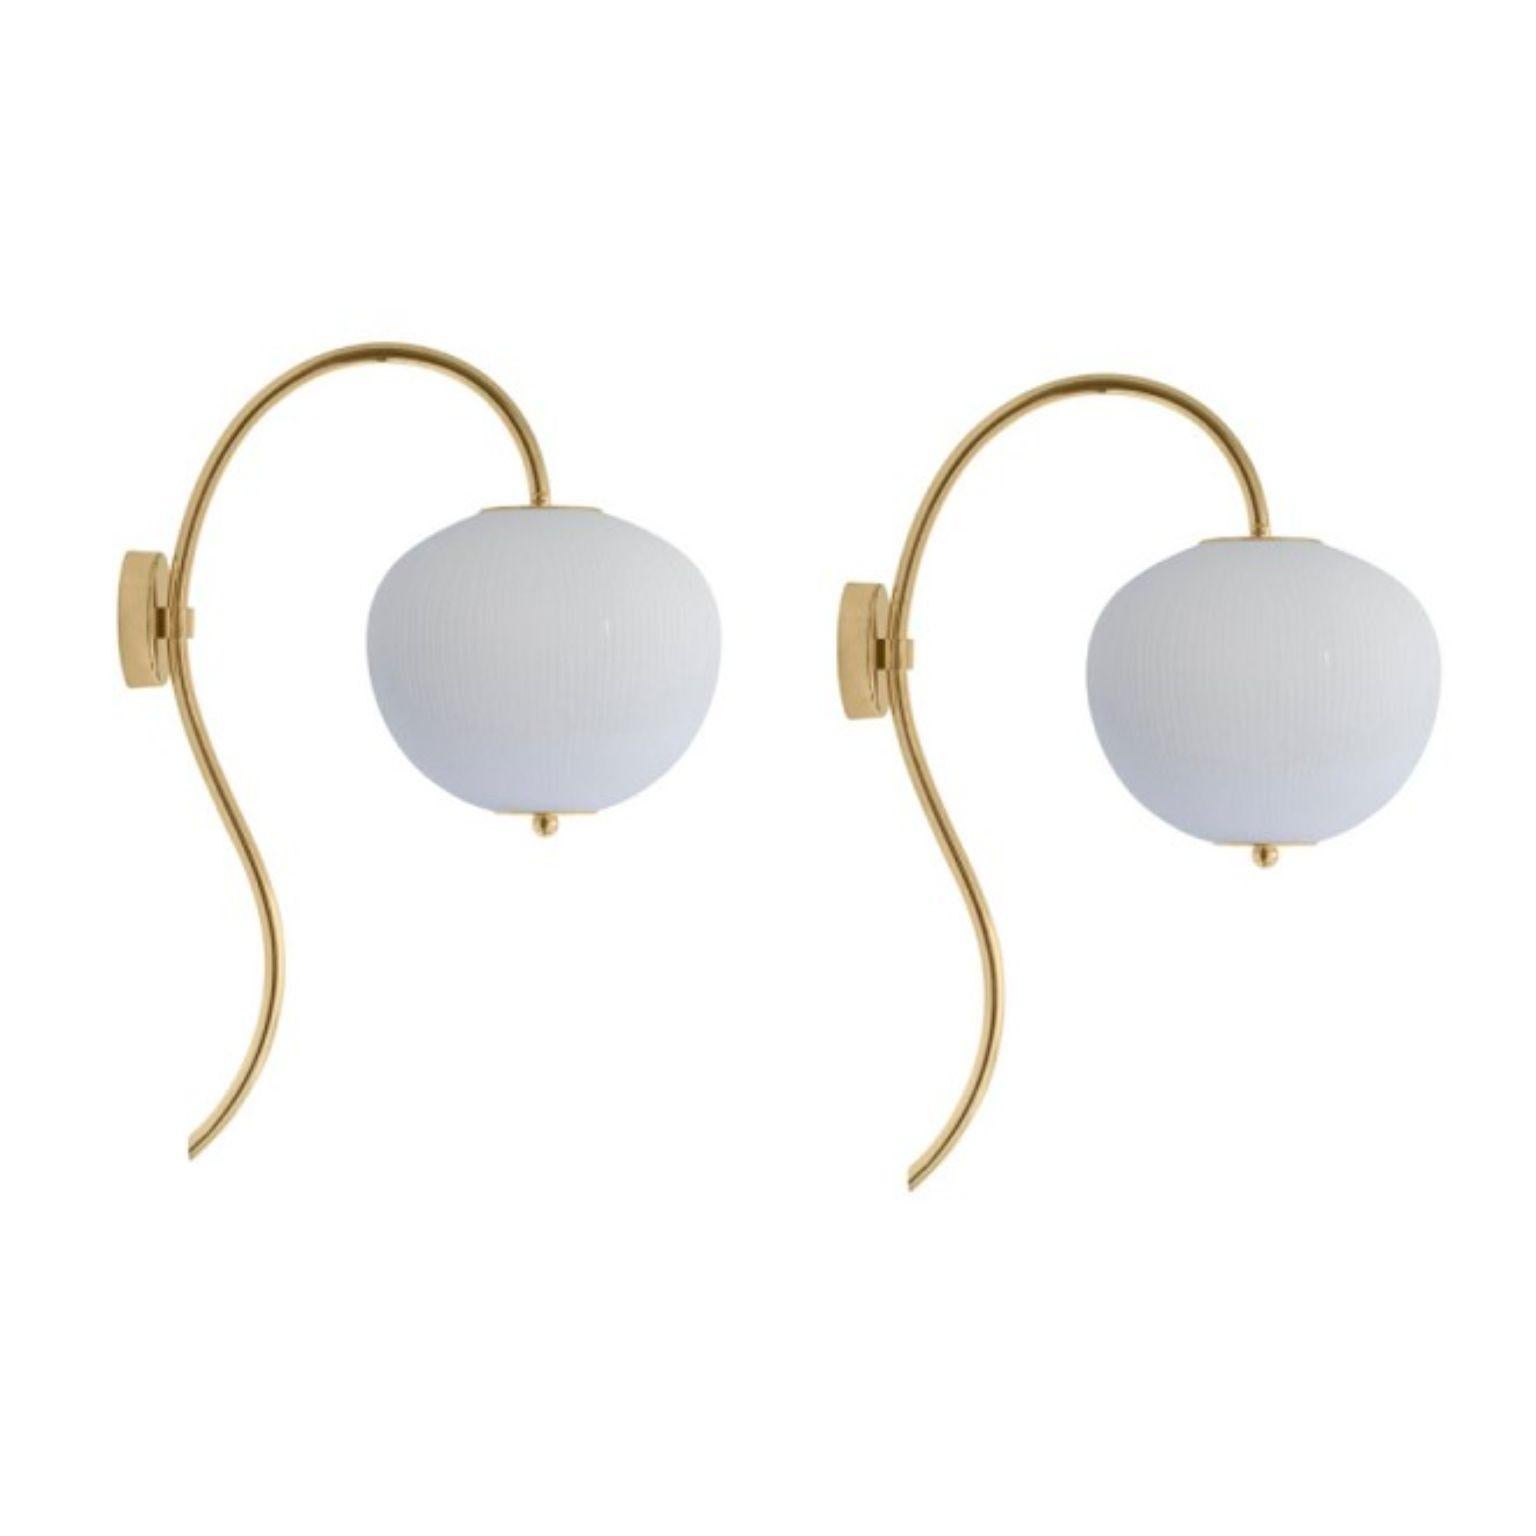 Wall lamp China 03 by Magic Circus Editions
Dimensions: H 62 x W 26.2 x D 41.5 cm
Materials: Brass, mouth blown glass sculpted with a diamond saw
Colour: rich grey

Available finishes: Brass, nickel
Available colours: enamel soft white, soft rose,